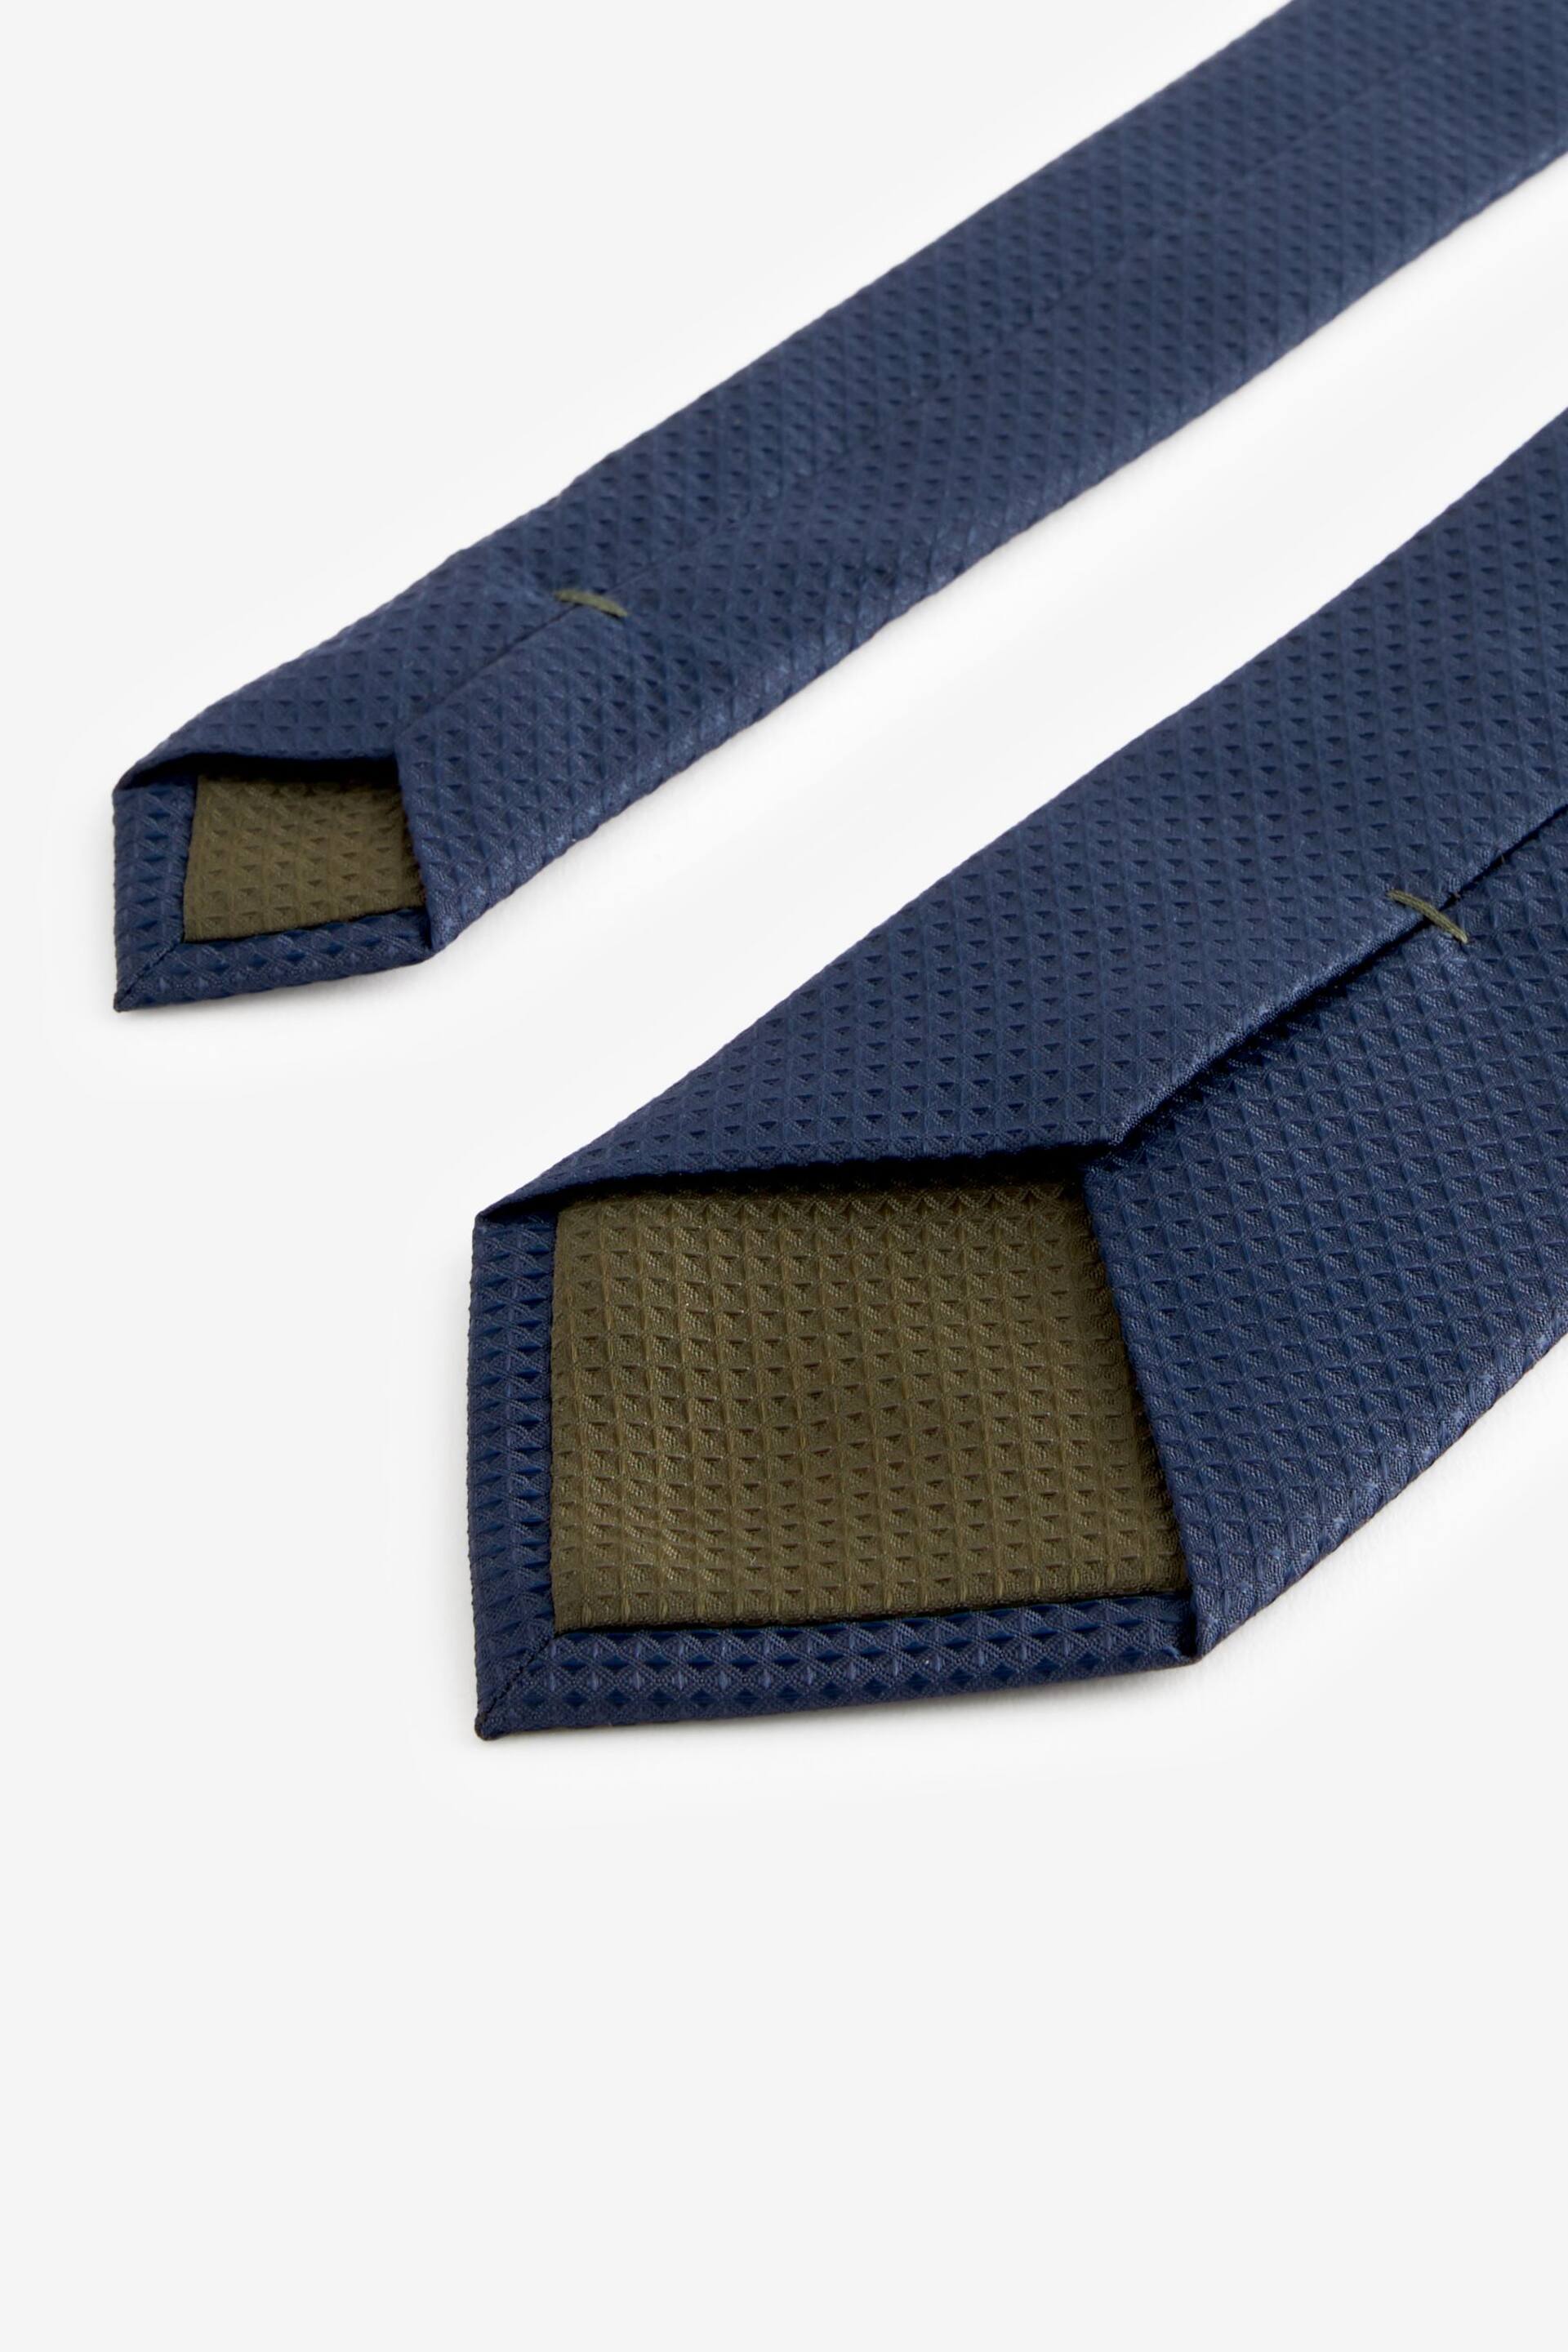 Navy Blue Waffle Textured Tie - Image 3 of 3